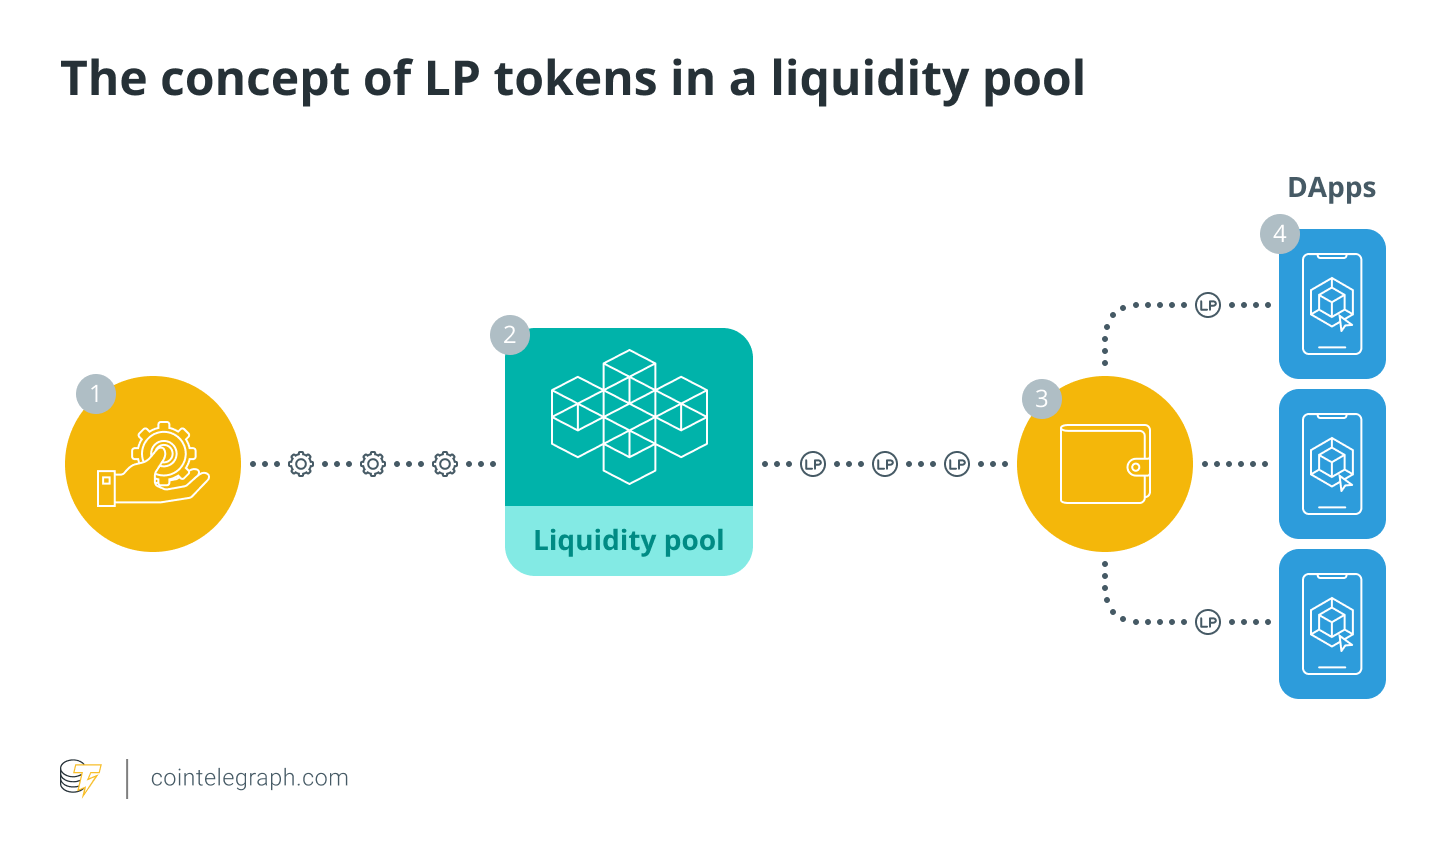 The concept of LP tokens in a liquidity pool